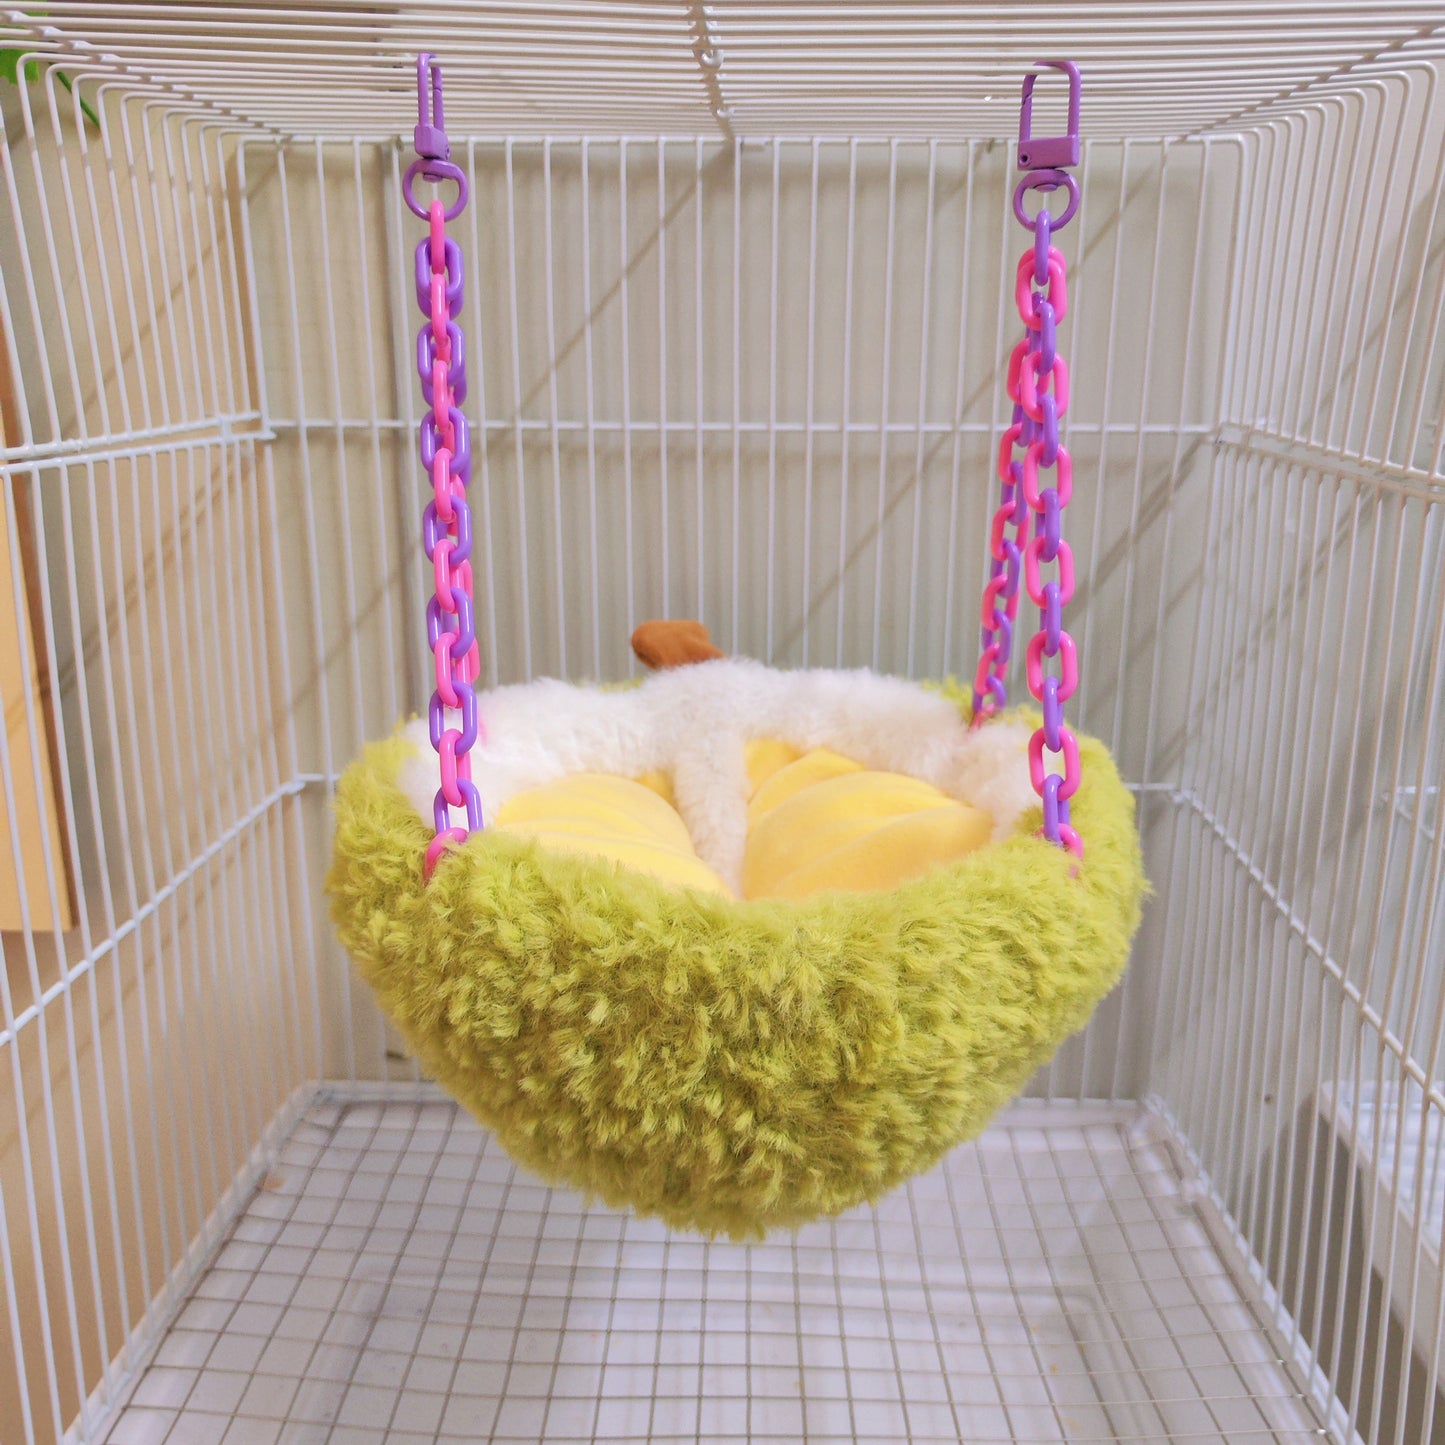 Crafted Green-Yellow Parrot Bird Durian Design Nest with Hooks & Plastic Chains, Hanging Birdhouse for Cage, Cotton-Filled Half-Moon Shape, Comfy Sleeping Spot for Pet Birds